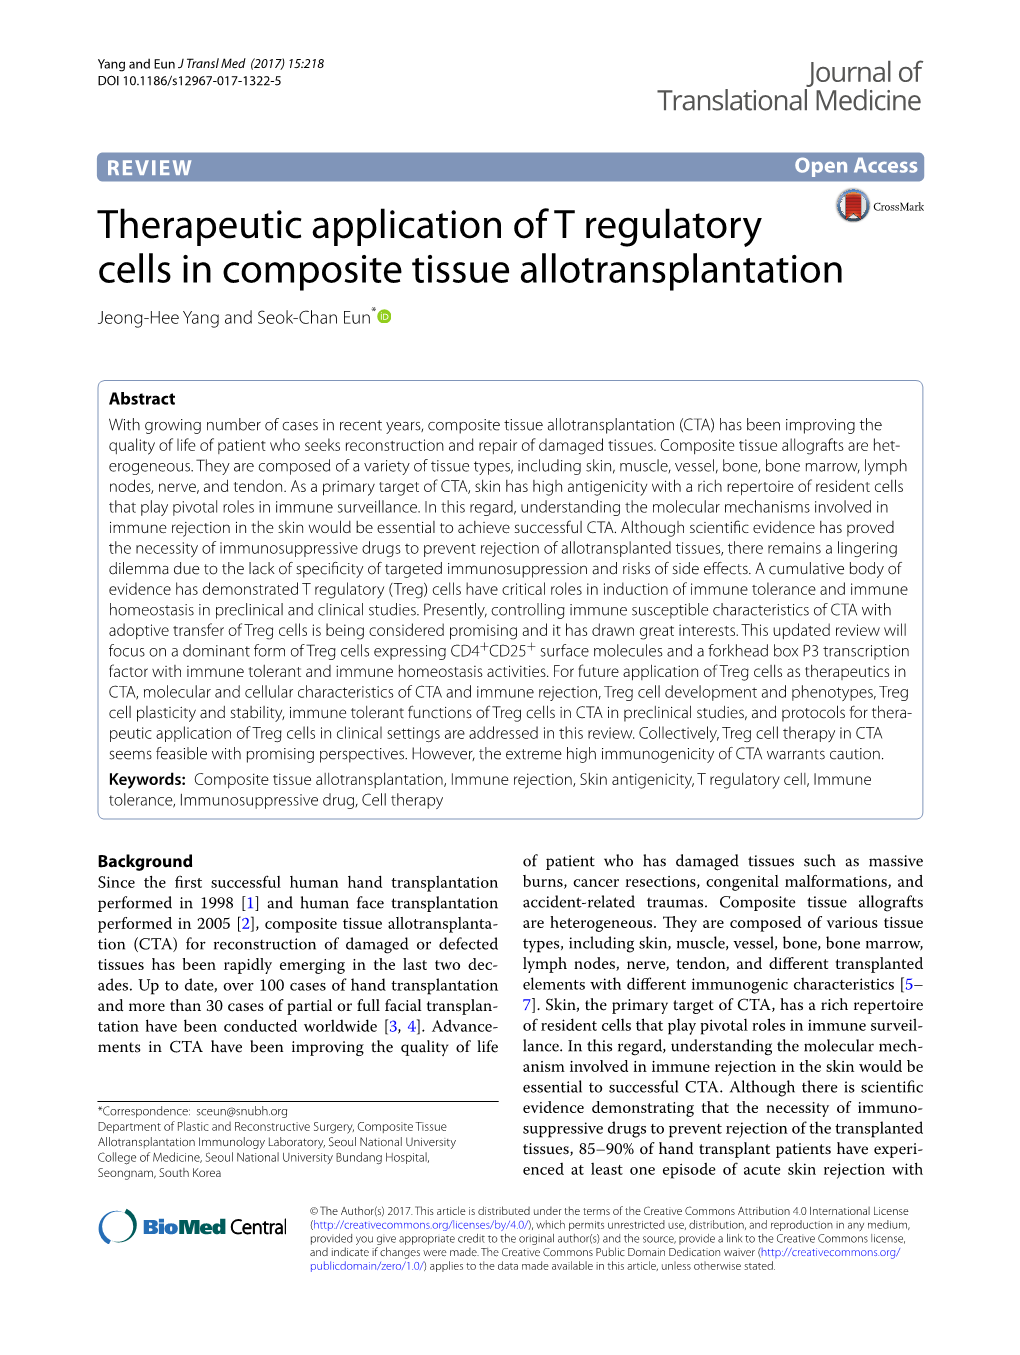 Therapeutic Application of T Regulatory Cells in Composite Tissue Allotransplantation Jeong‑Hee Yang and Seok‑Chan Eun*